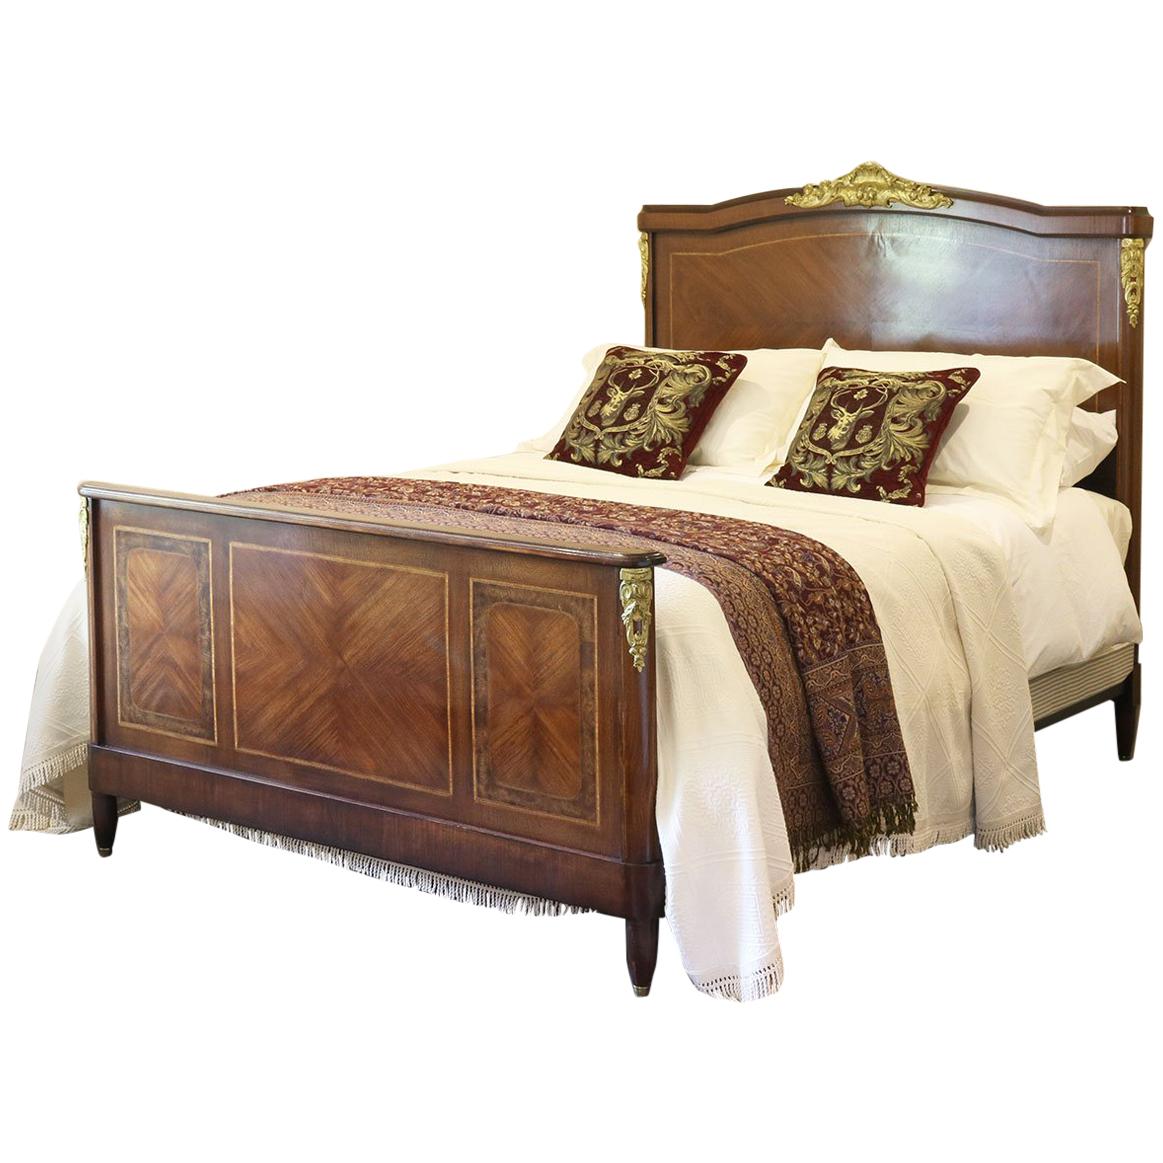 Inlaid Empire Style Antique Bed